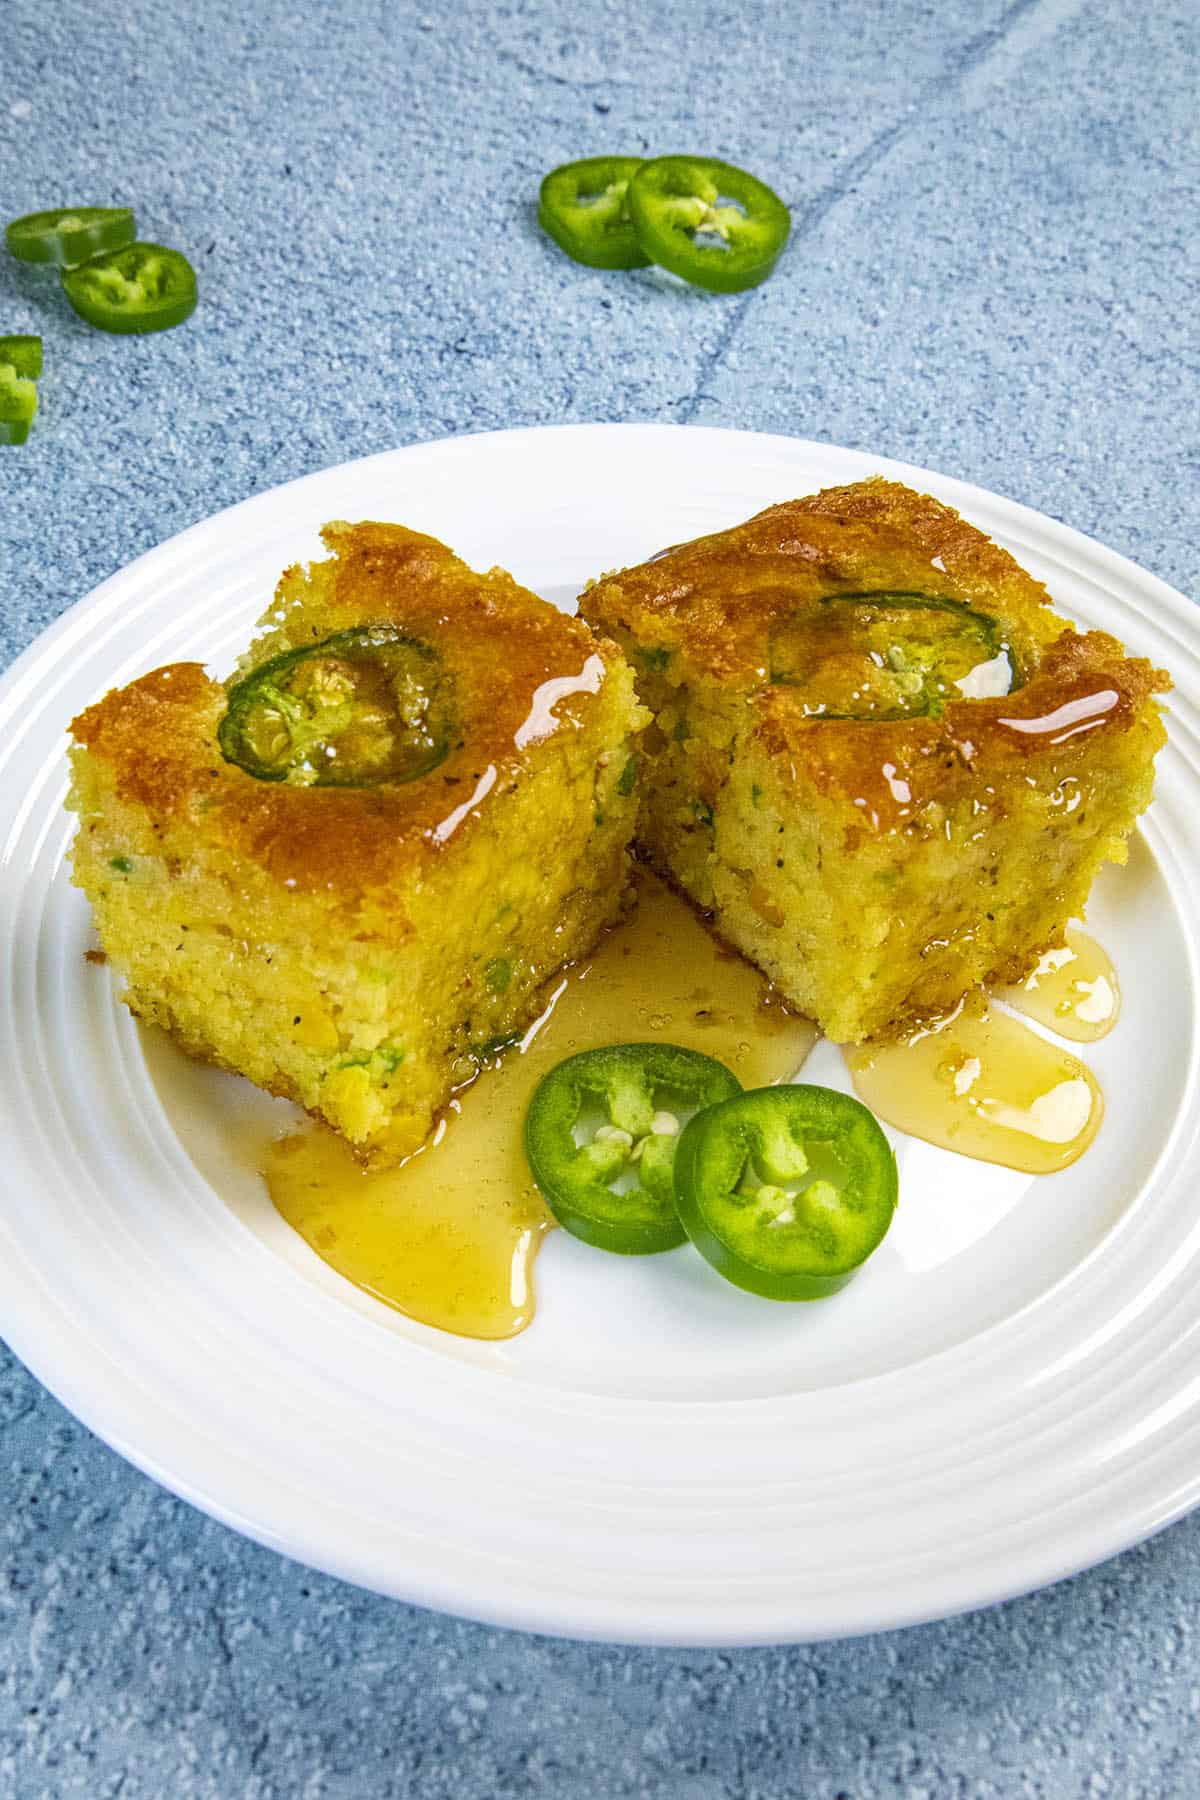 Two slices of Jalapeno Cornbread dripping with honey